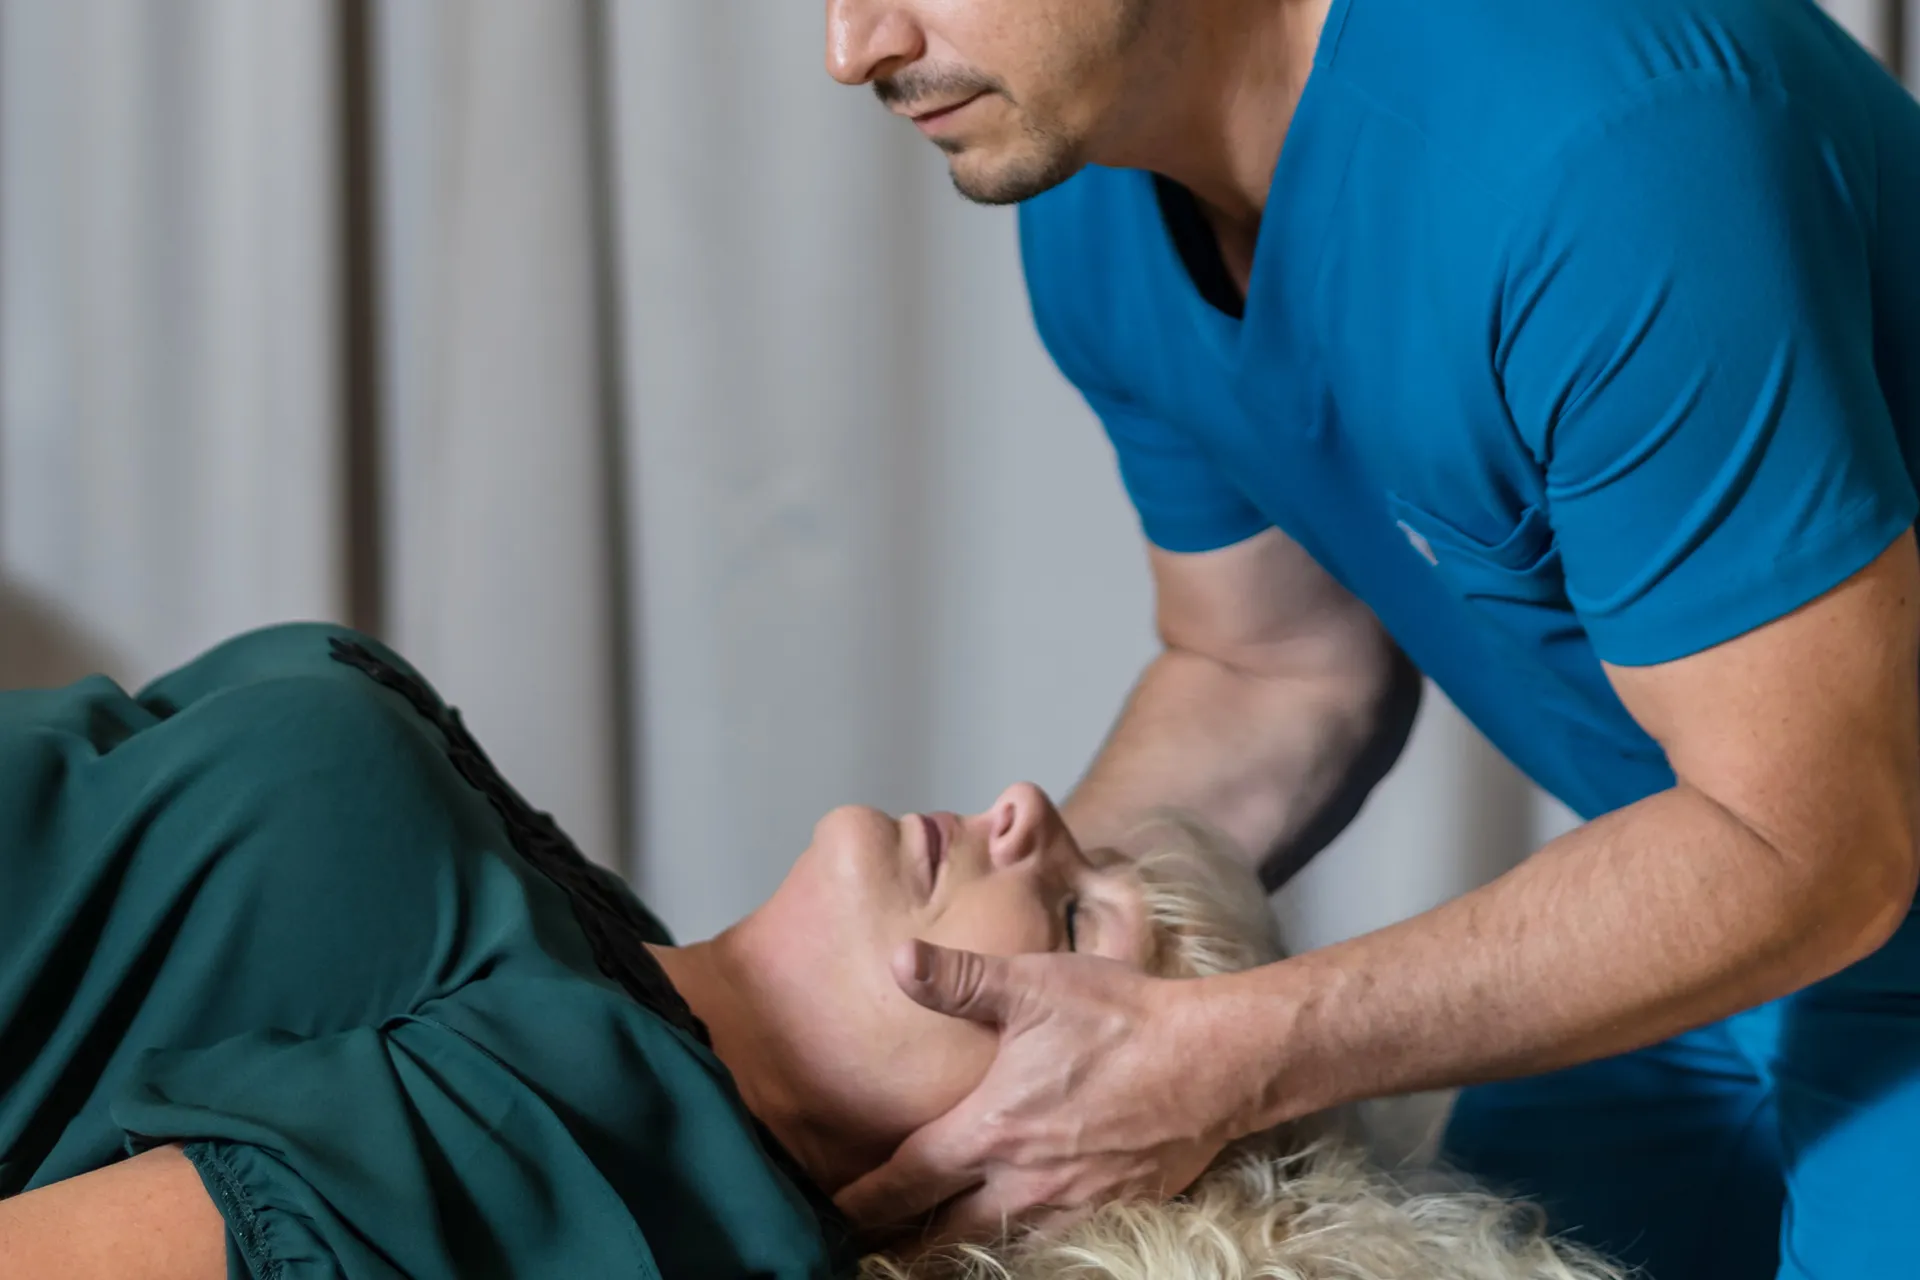 Chiropractor treating a patient's neck